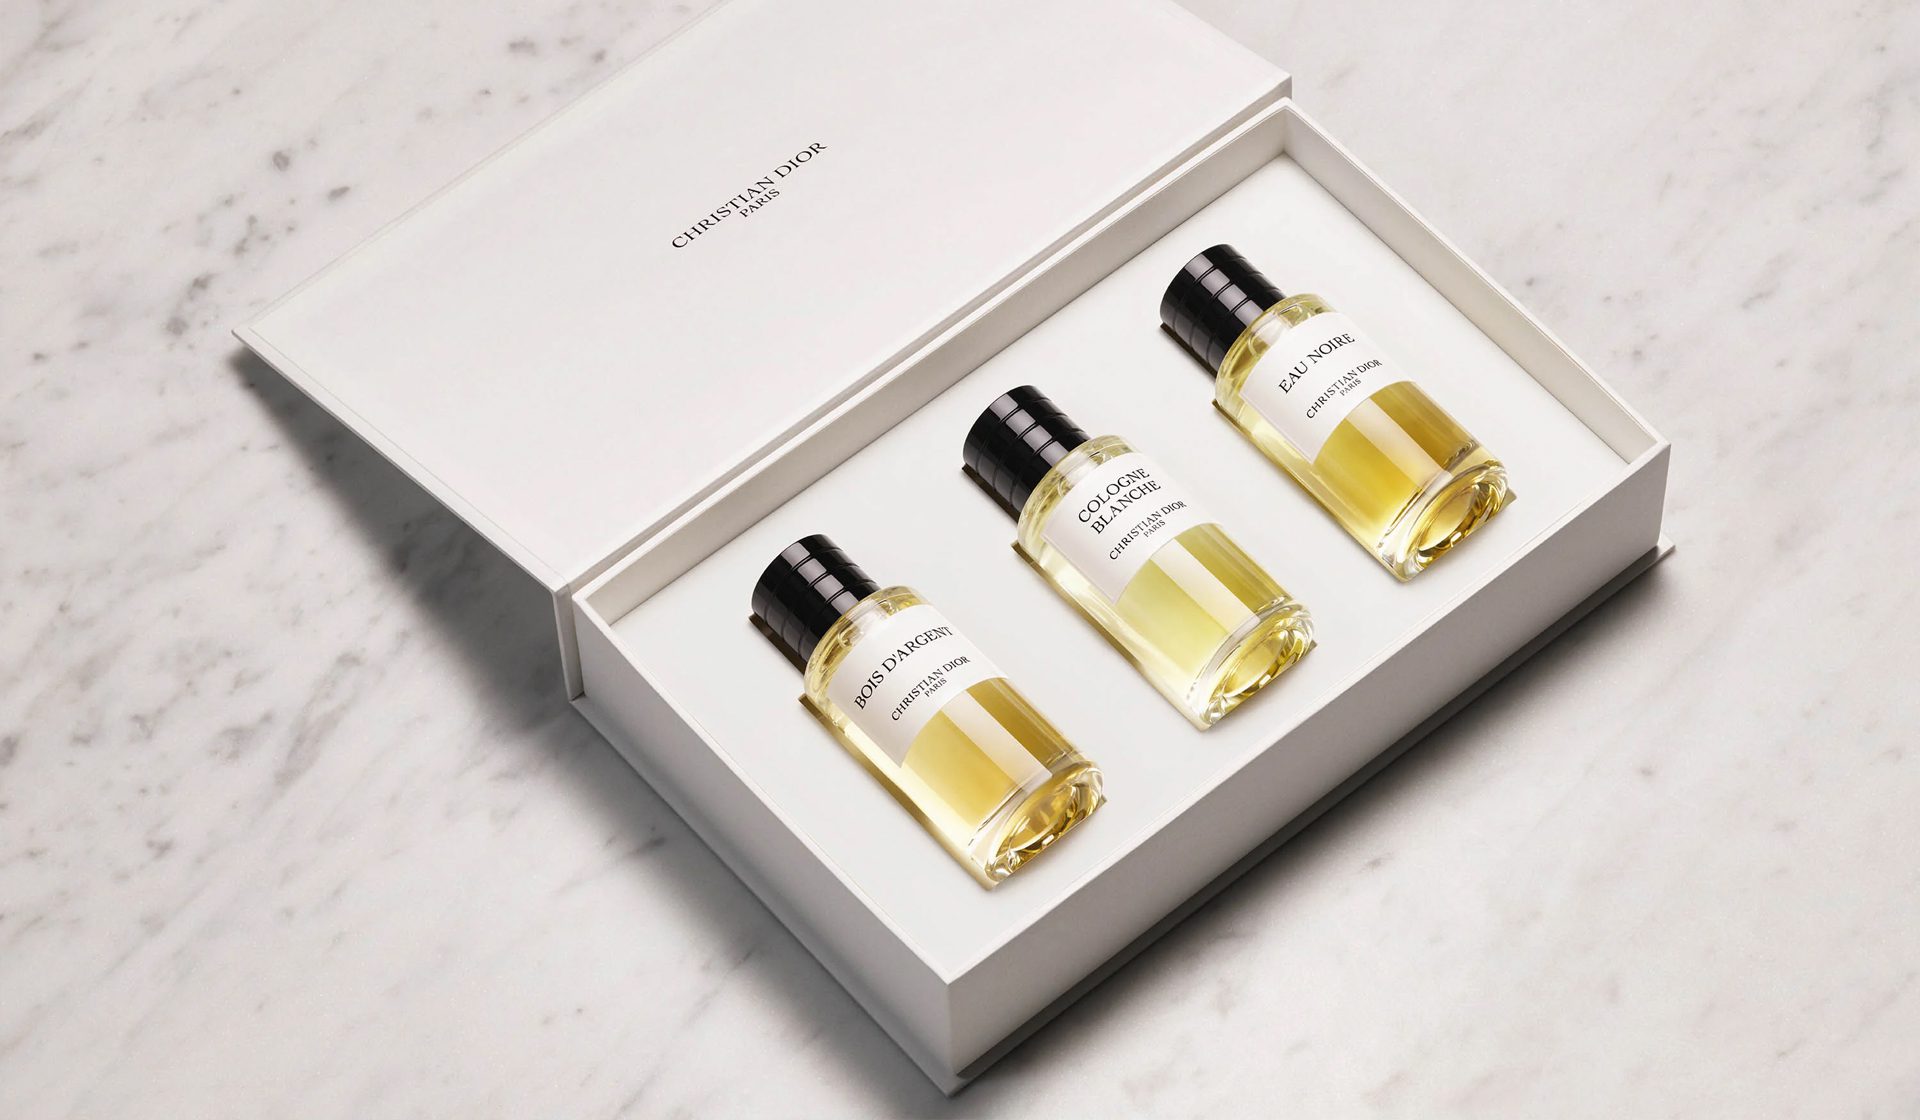 Louis Vuitton Bottles Summer with New Scent Trio